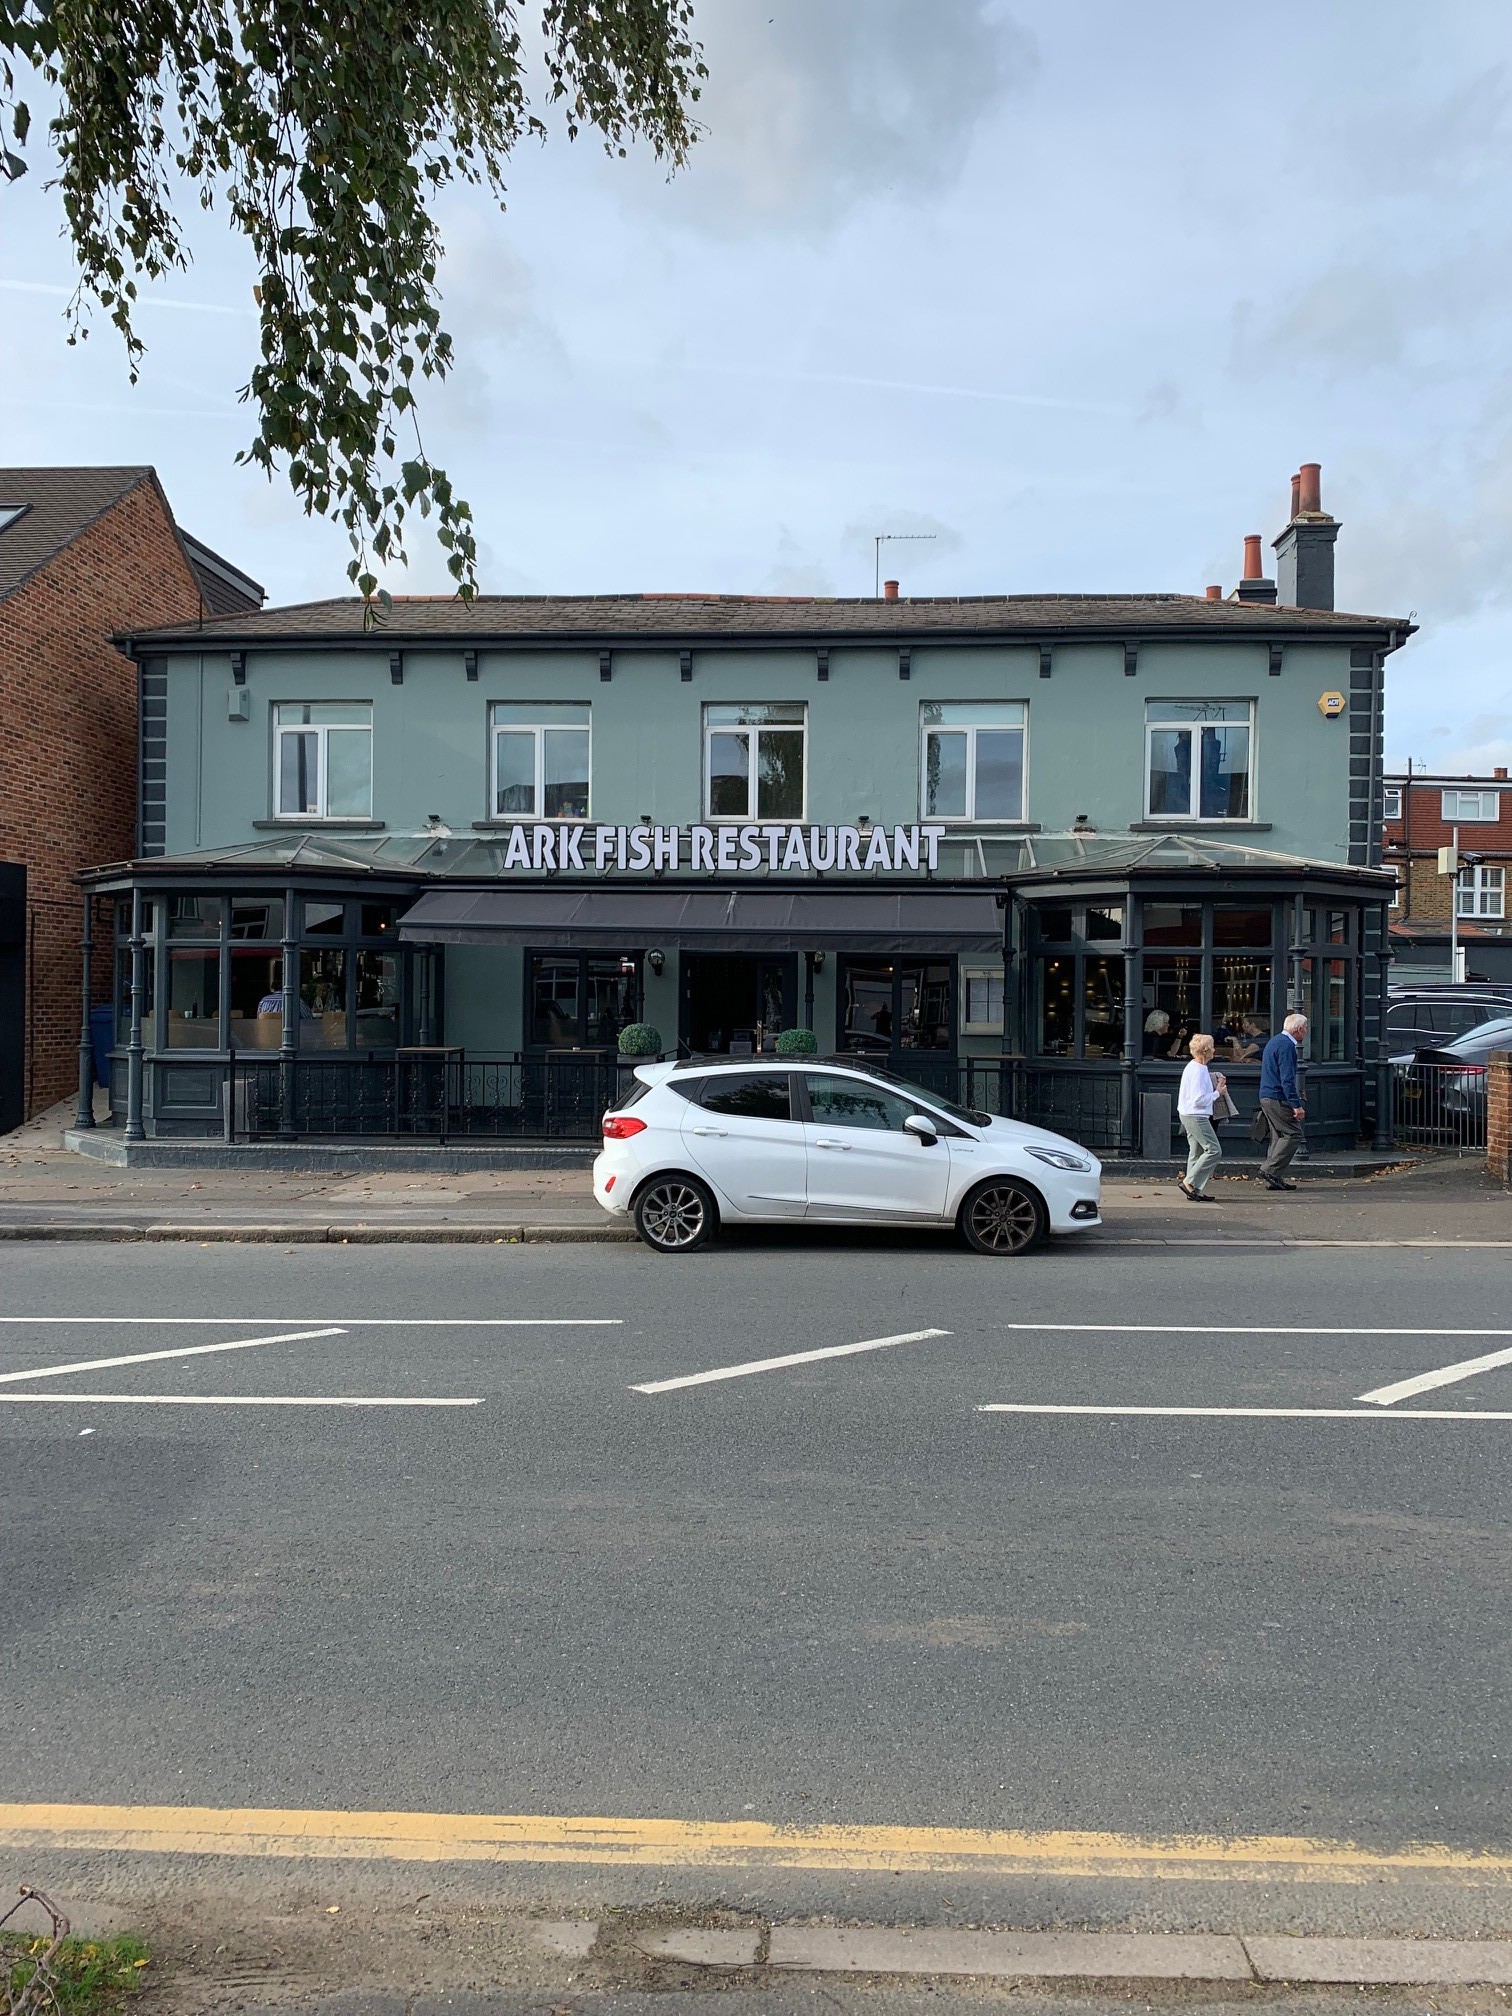 LEASE FOR SALE, Restaurant, South Woodford. Ref.1762